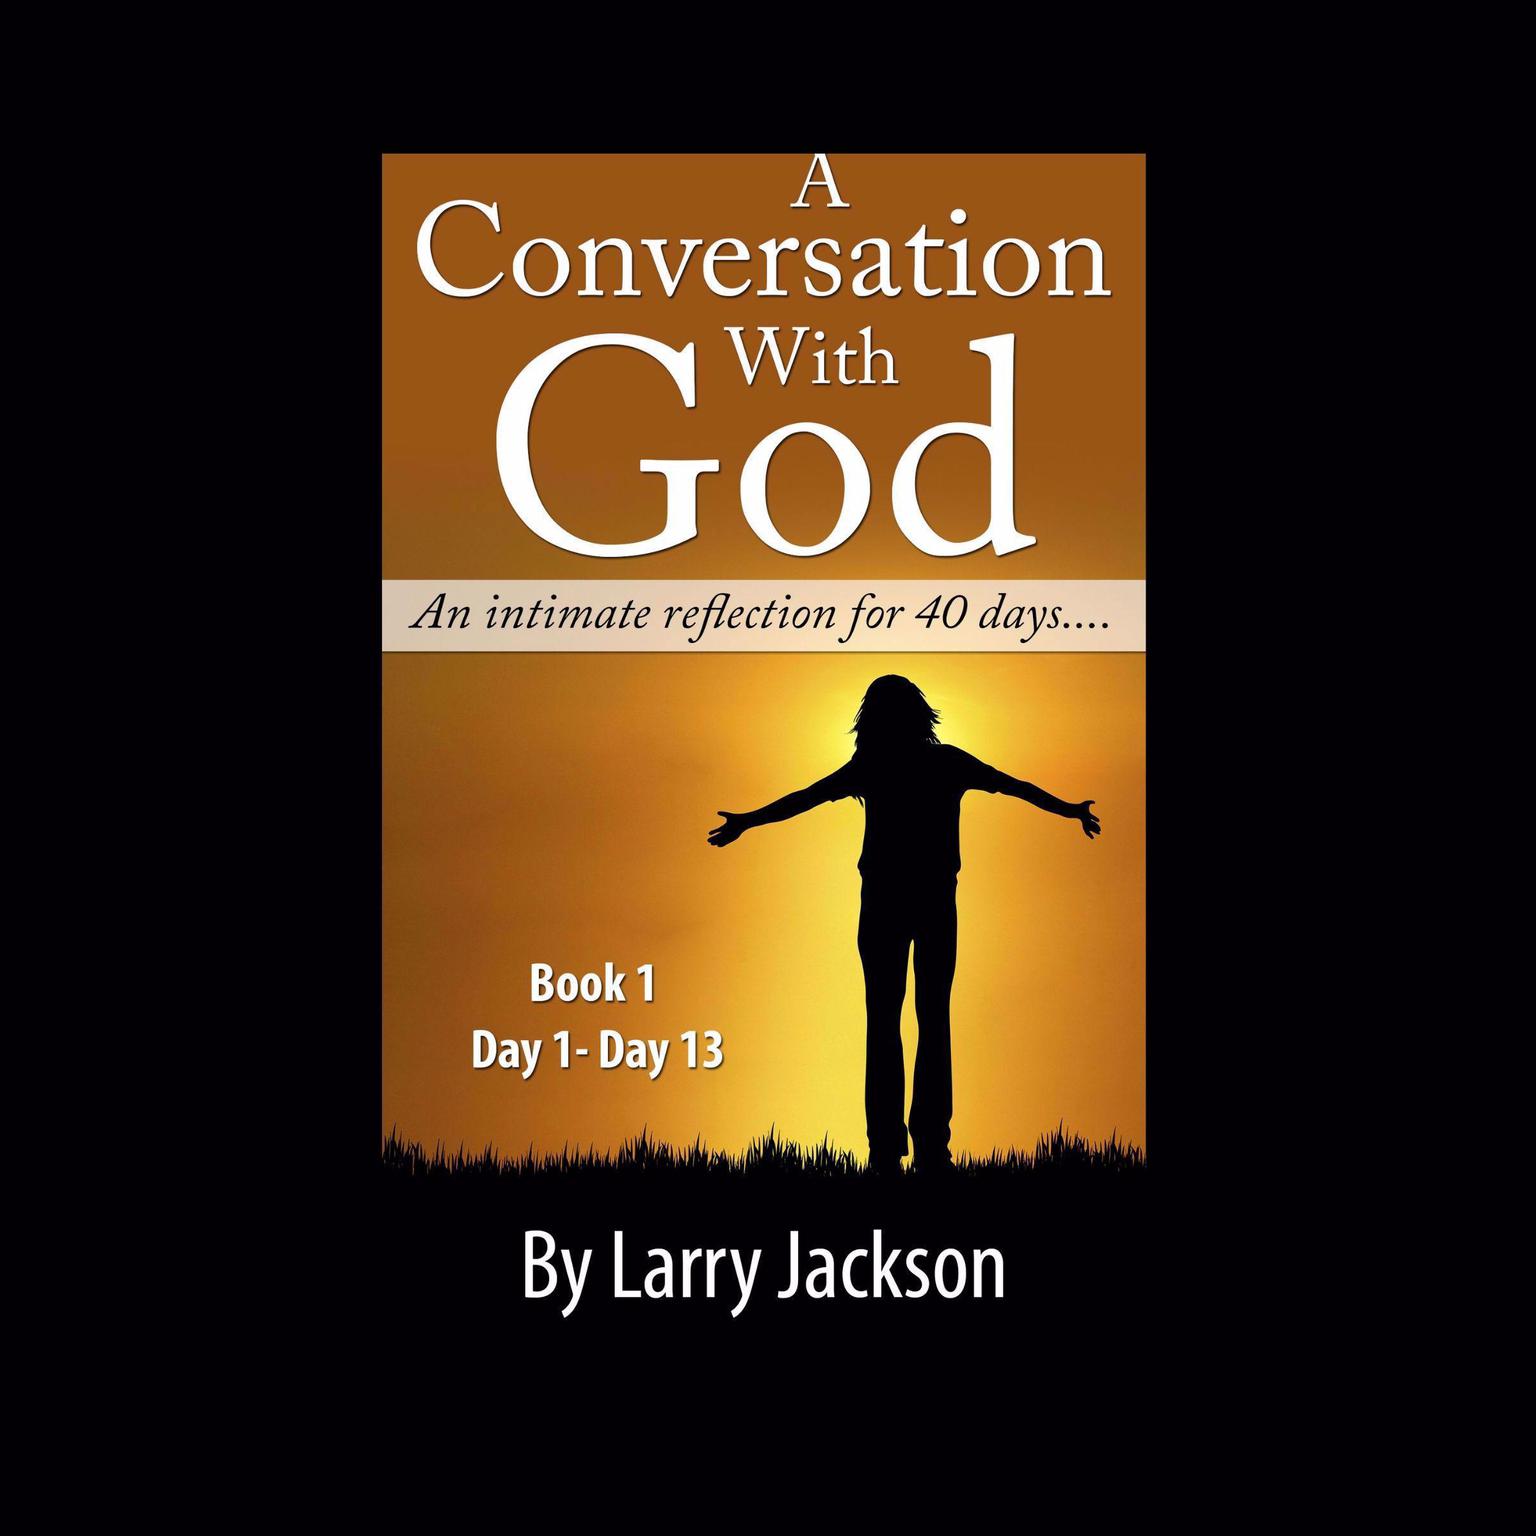 A Conversation with God - An Intimate reflection for 40 days - Book 1 Day1-13: Chrsitian audiobook, Chrsitian non-fiction audiobook Audiobook, by Larry Jackson